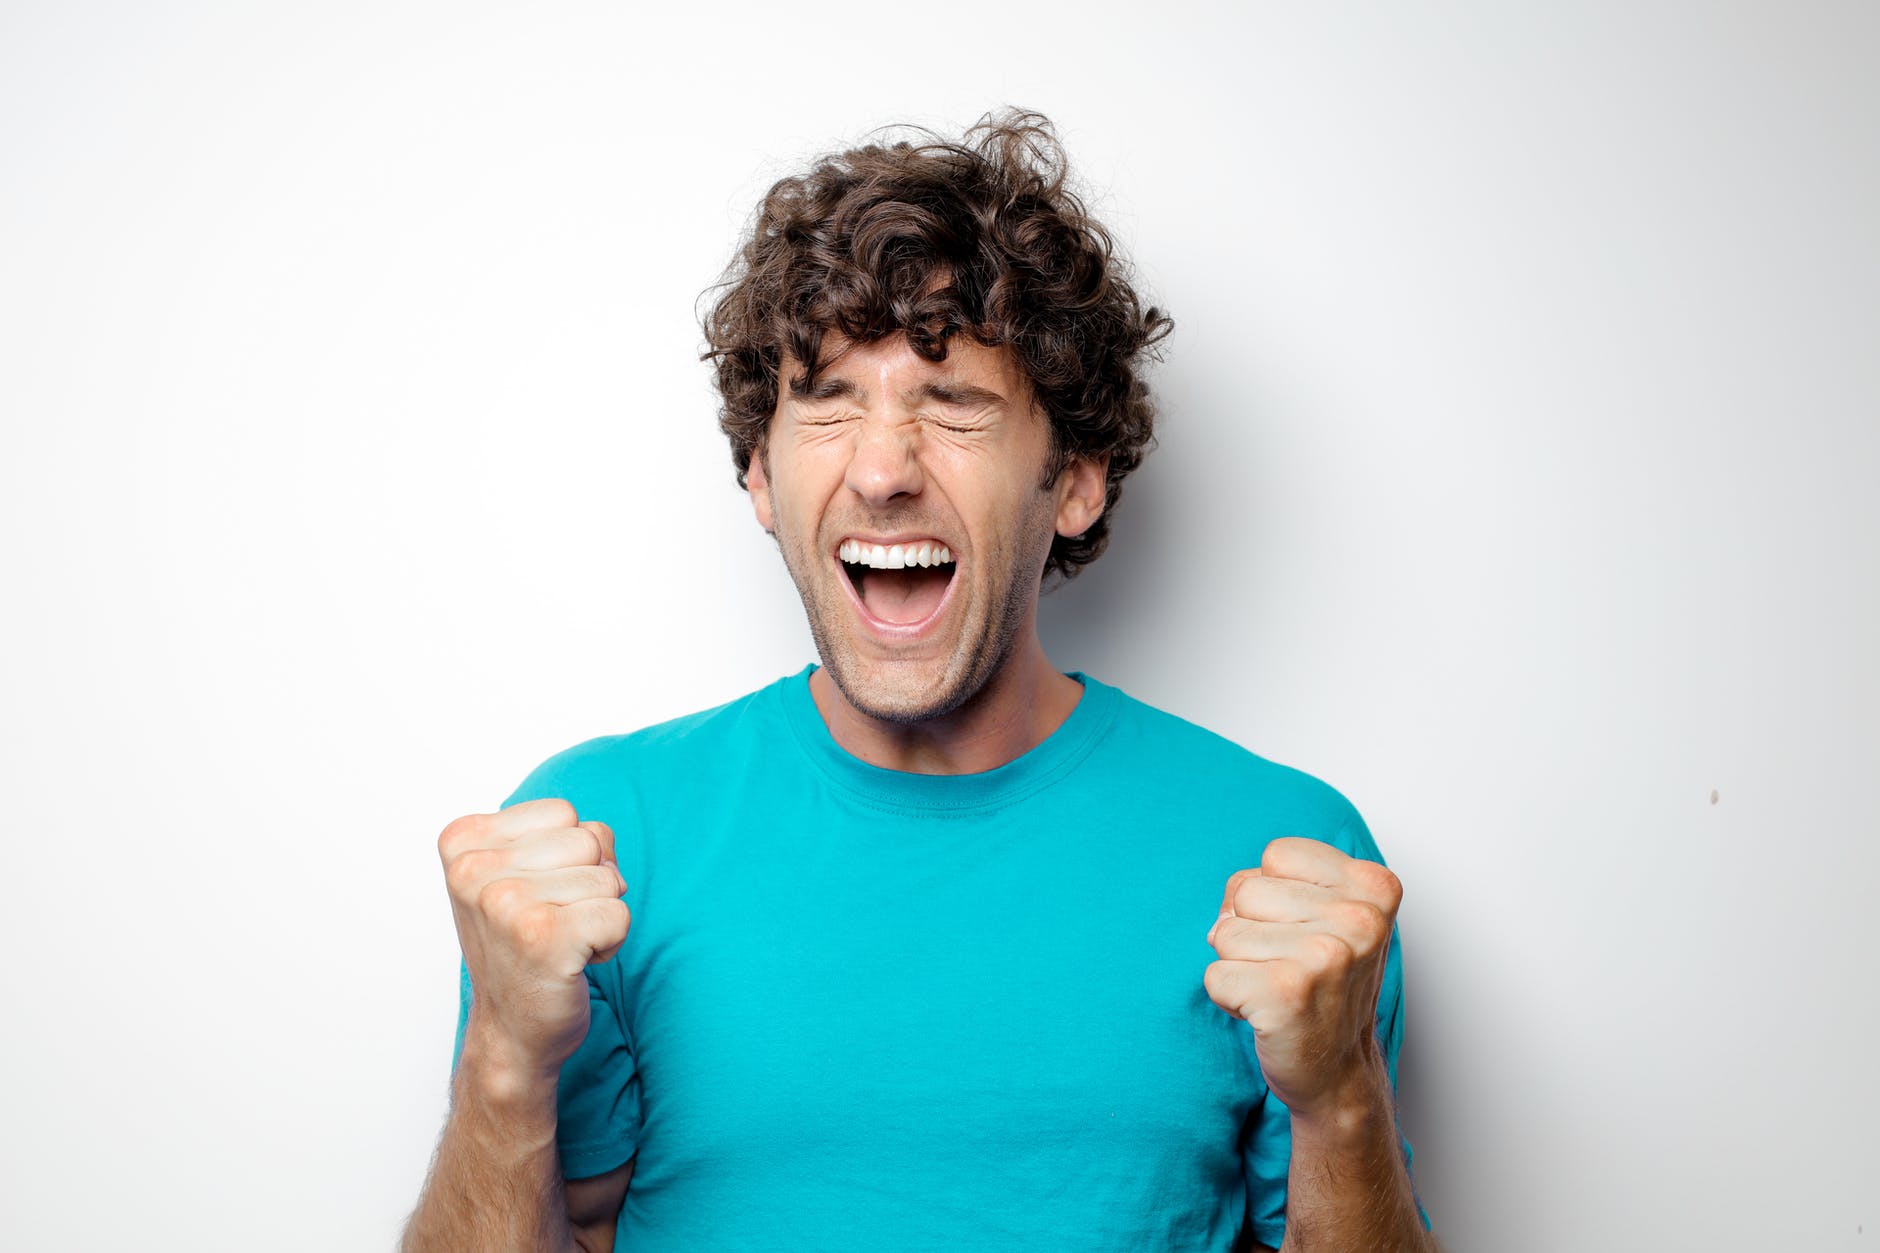 portrait photo of excited man in blue t shirt standing in front of white background